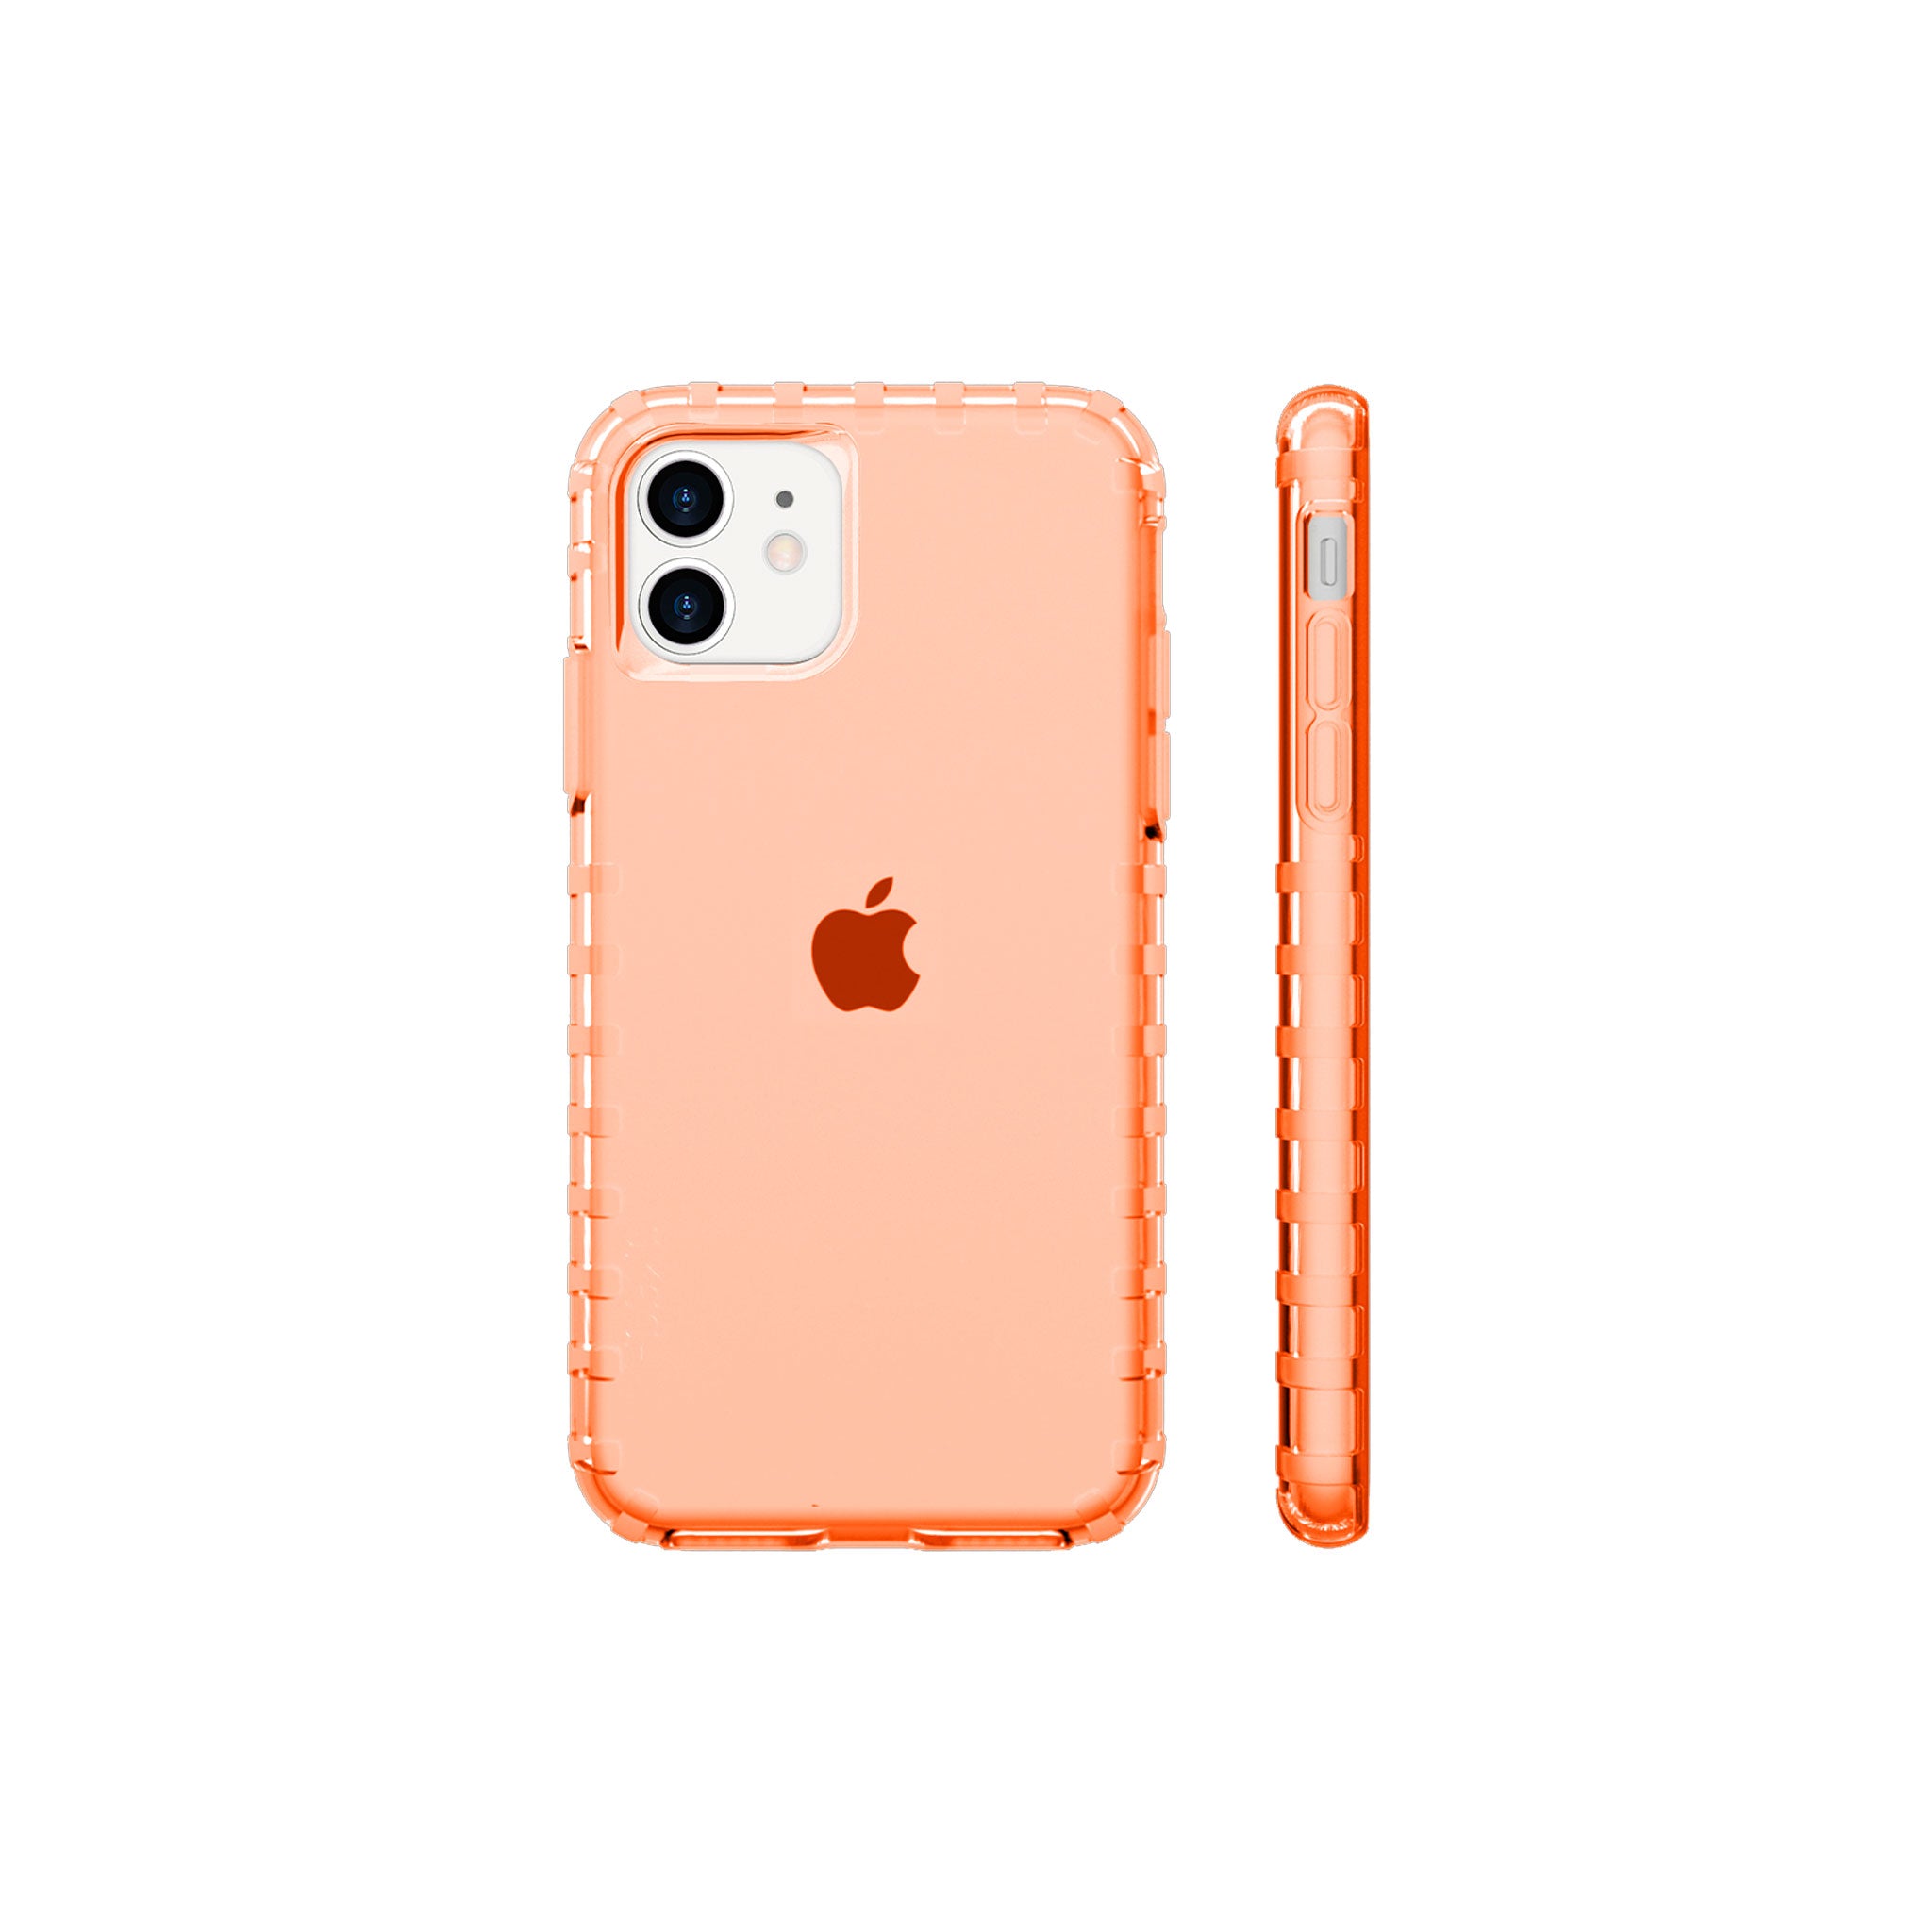 Skech - Echo Air Case For Apple Iphone 11 - Coral